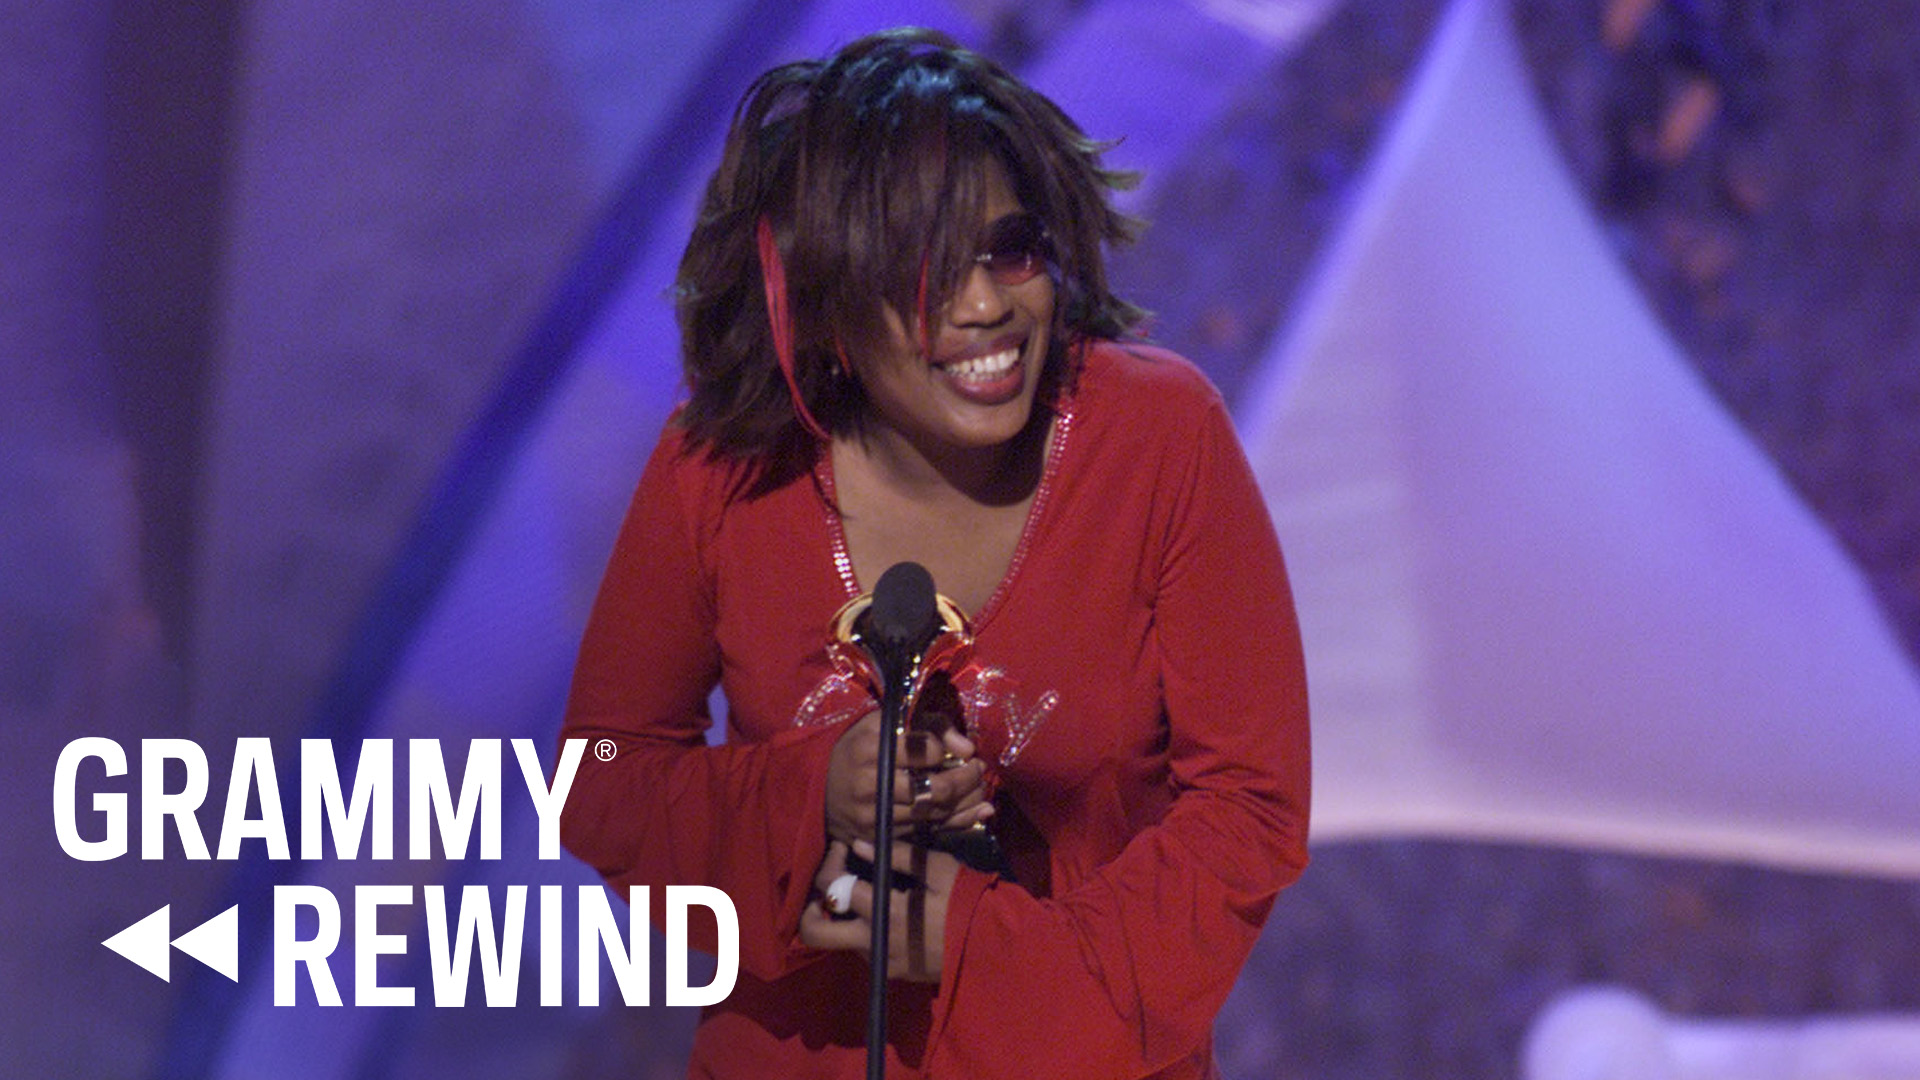 Macy Gray Wins A GRAMMY For "I Try"